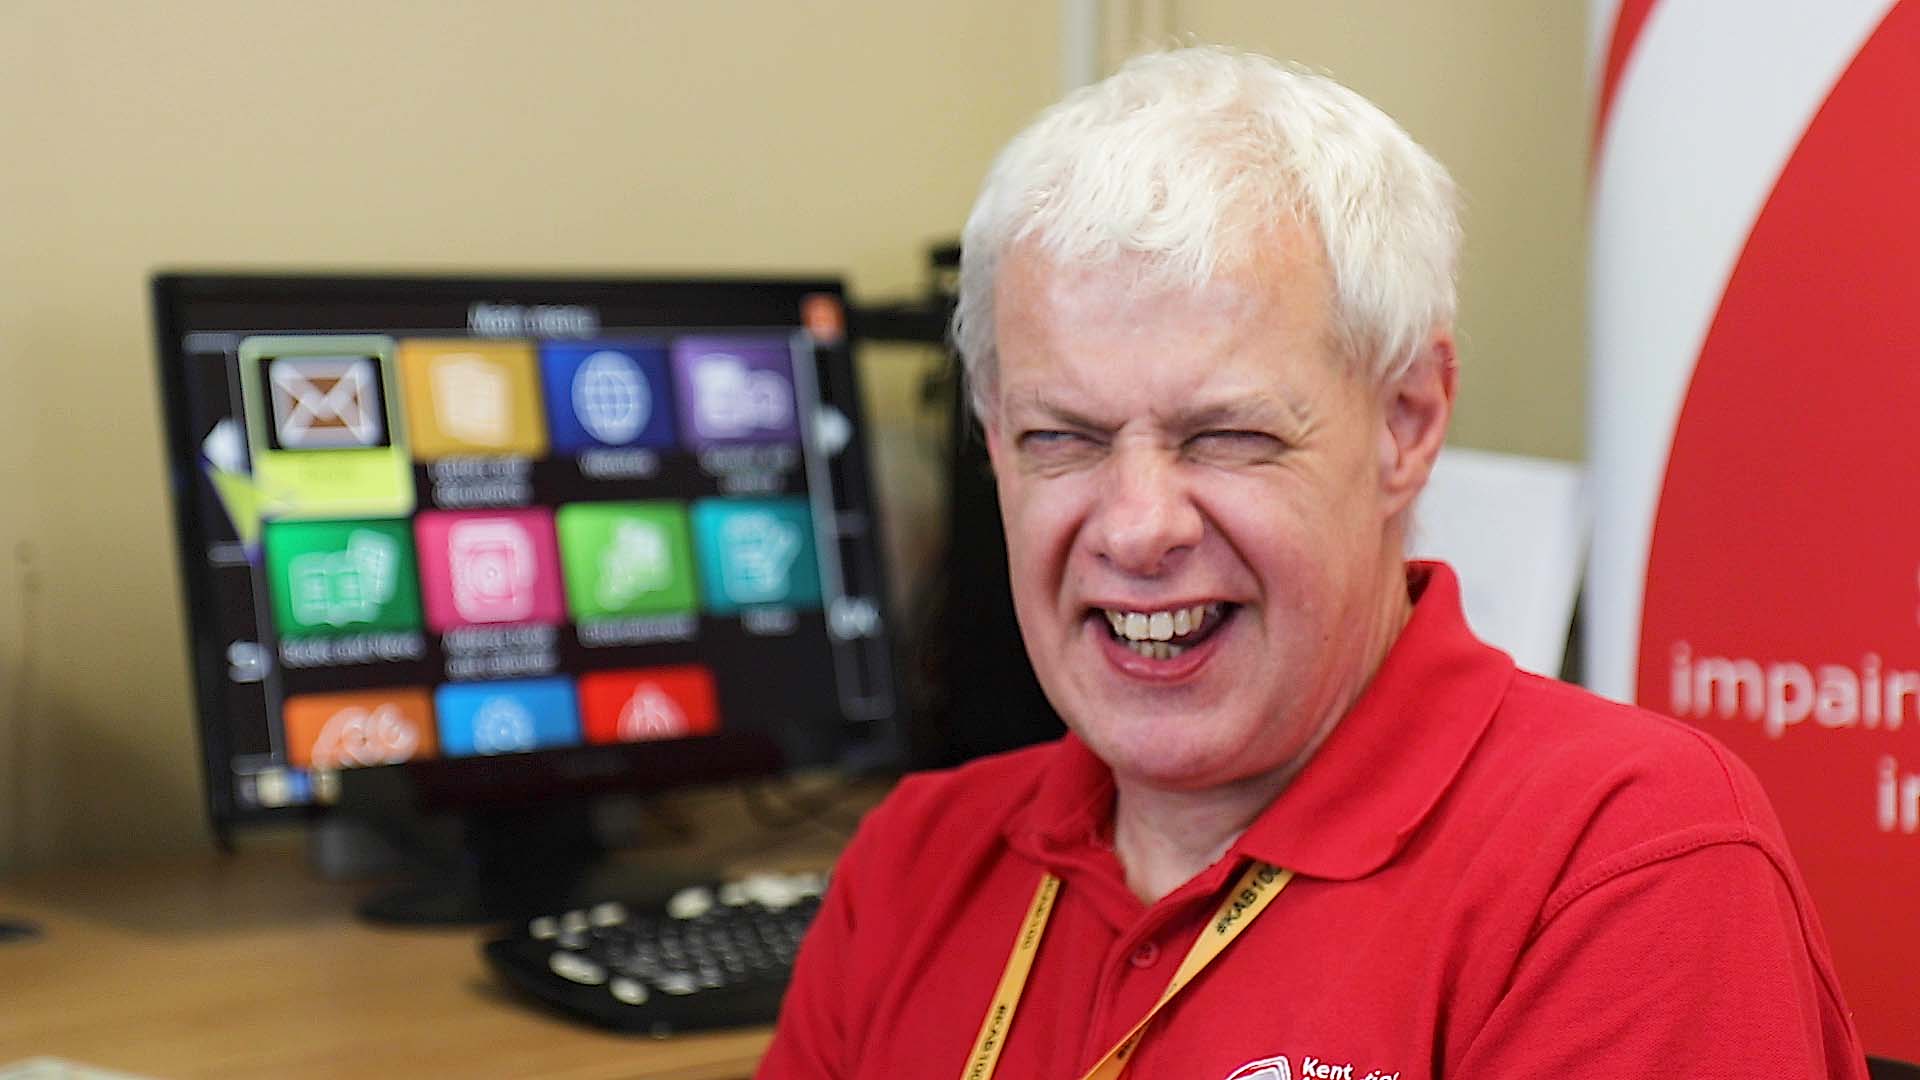 An image of Steve, an Assistive Technology Worker at KAB.